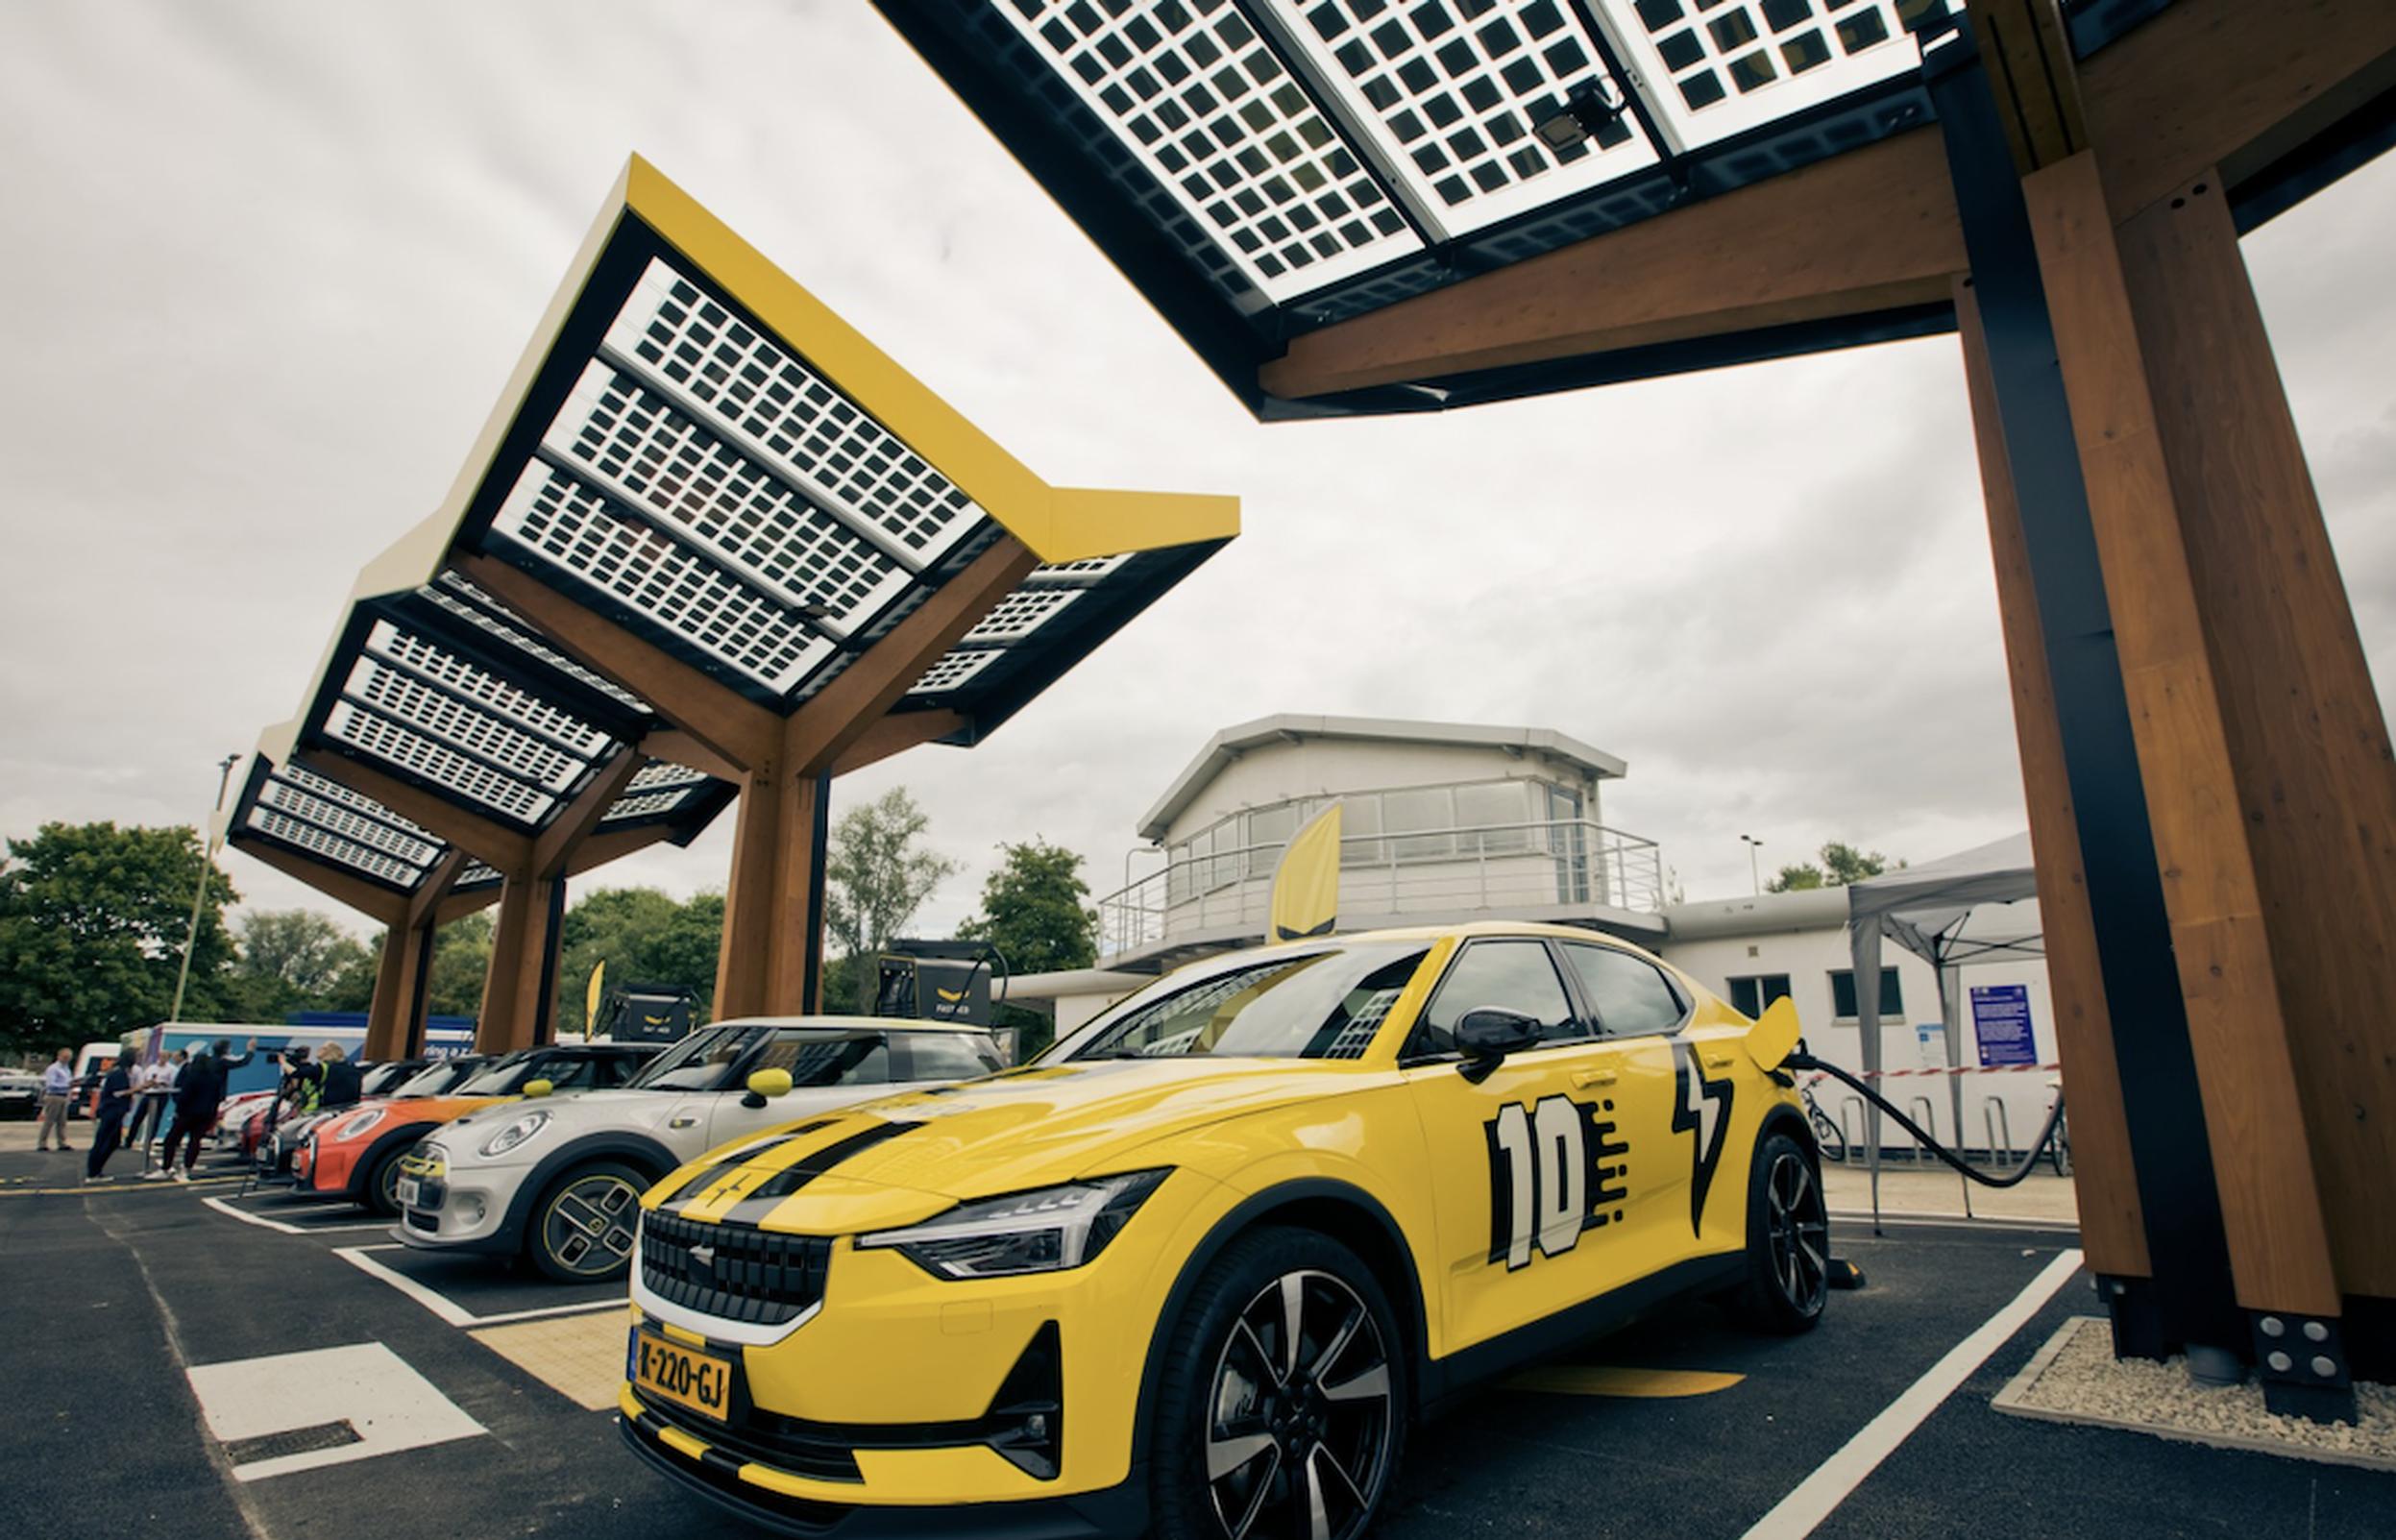 ChargeSafe is inspecting and rating all of Fastned’s UK-based charging locations